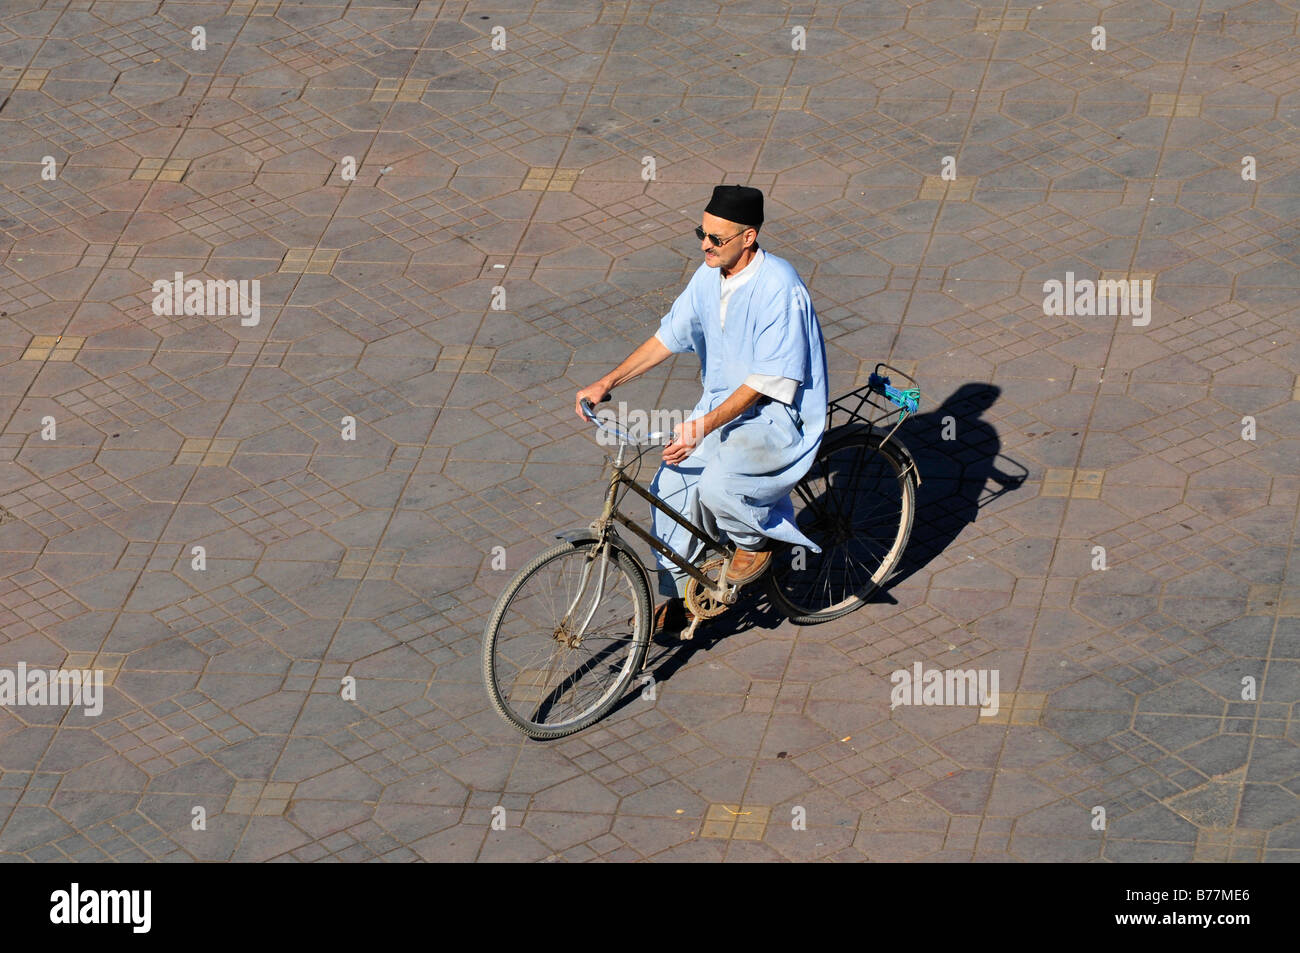 Cyclist in the Place Djemma el-Fna, Square of the hanged, imposter square, Marrakech, Morocco, Africa Stock Photo